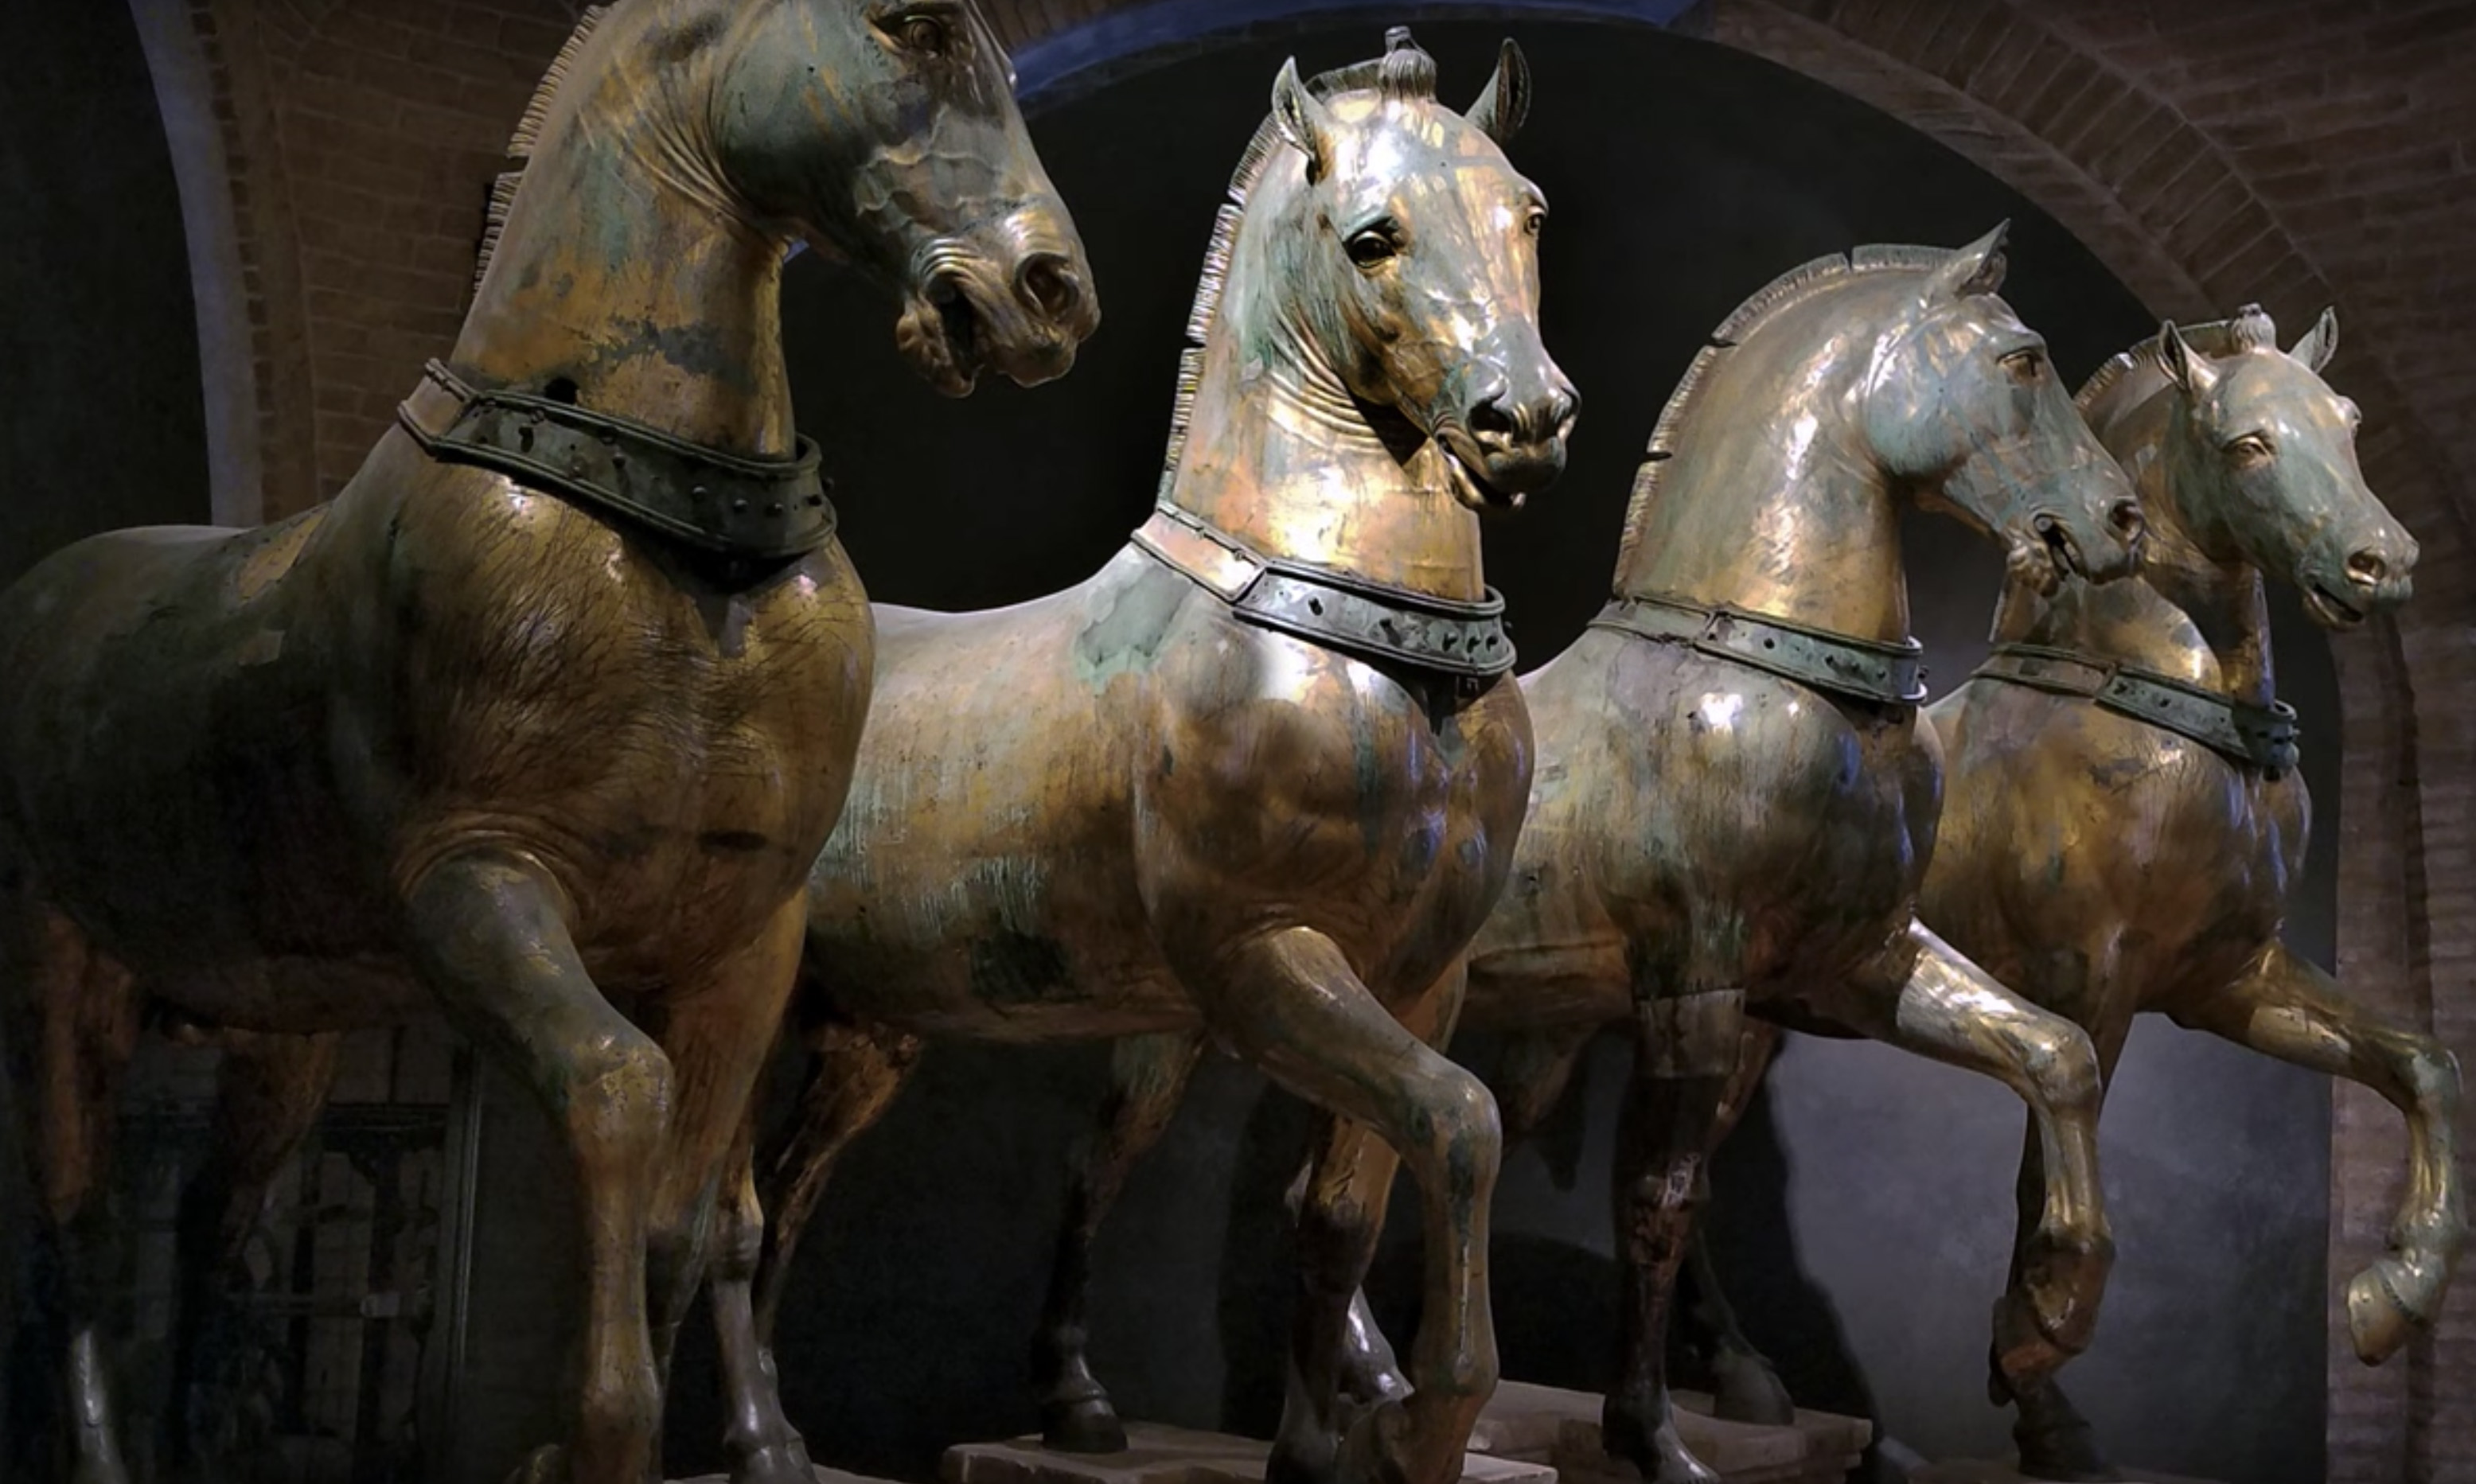 Horses of San Marco (ancient Greek or Roman, likely Imperial Rome), 4th century B.C.E. to 4th century C.E., copper alloy, 235 x 250 cm each (Basilica of San Marco, Venice)